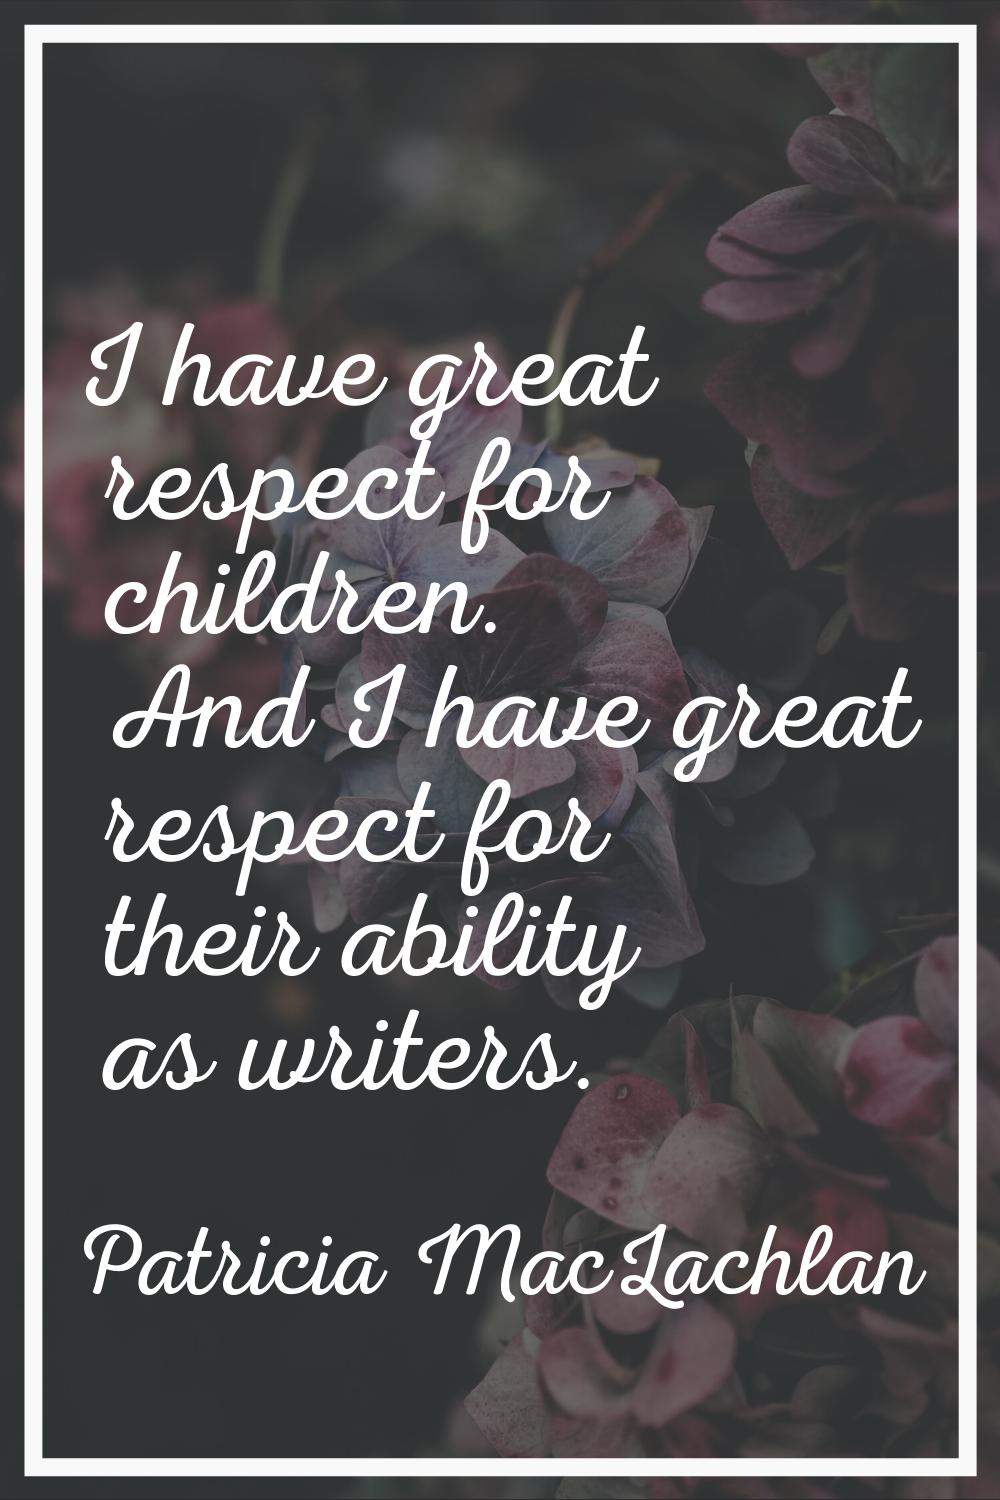 I have great respect for children. And I have great respect for their ability as writers.